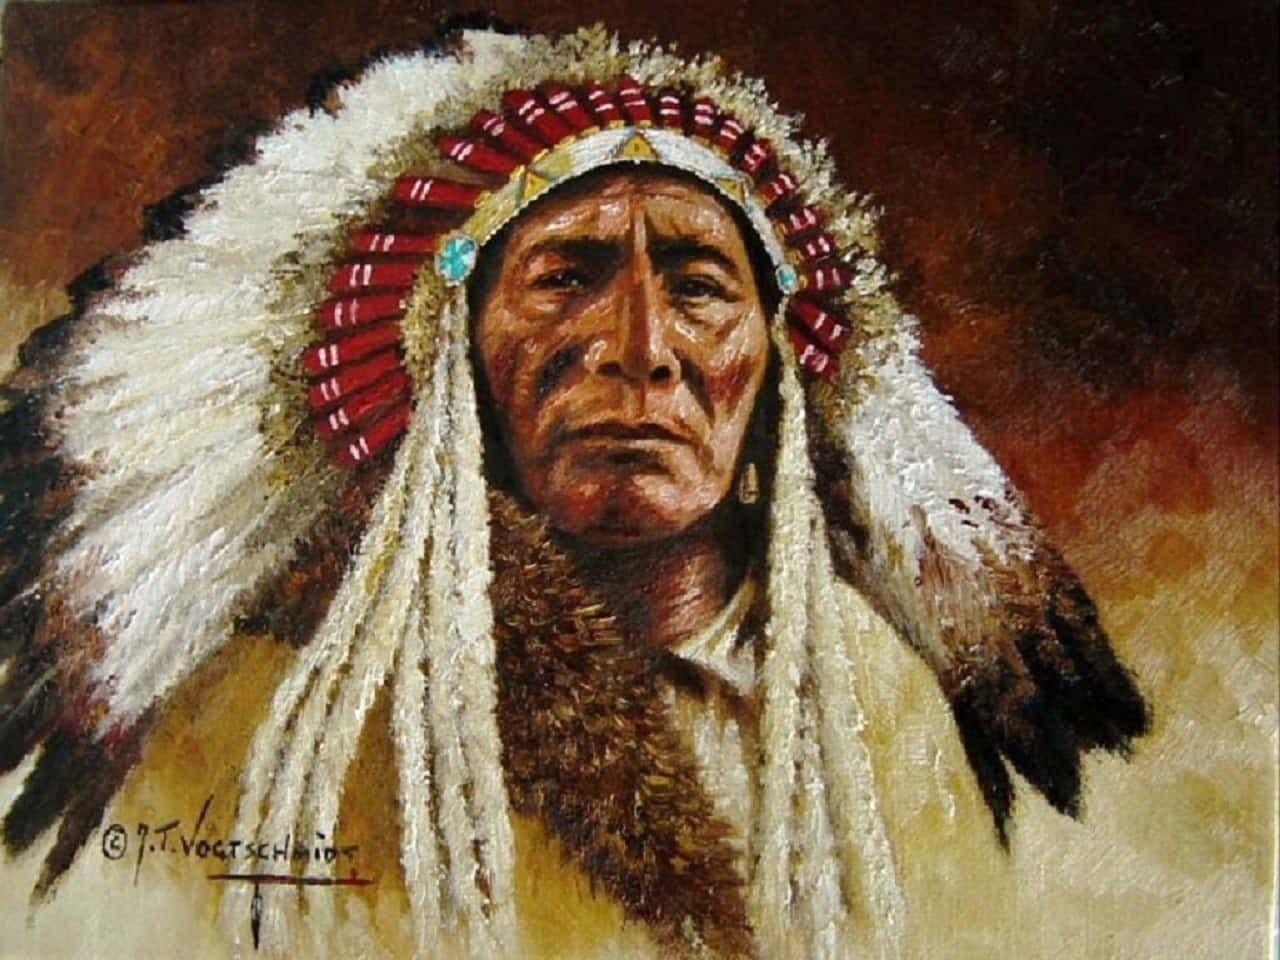 Native American Indian Warrior Looking Into The Distance Wallpaper